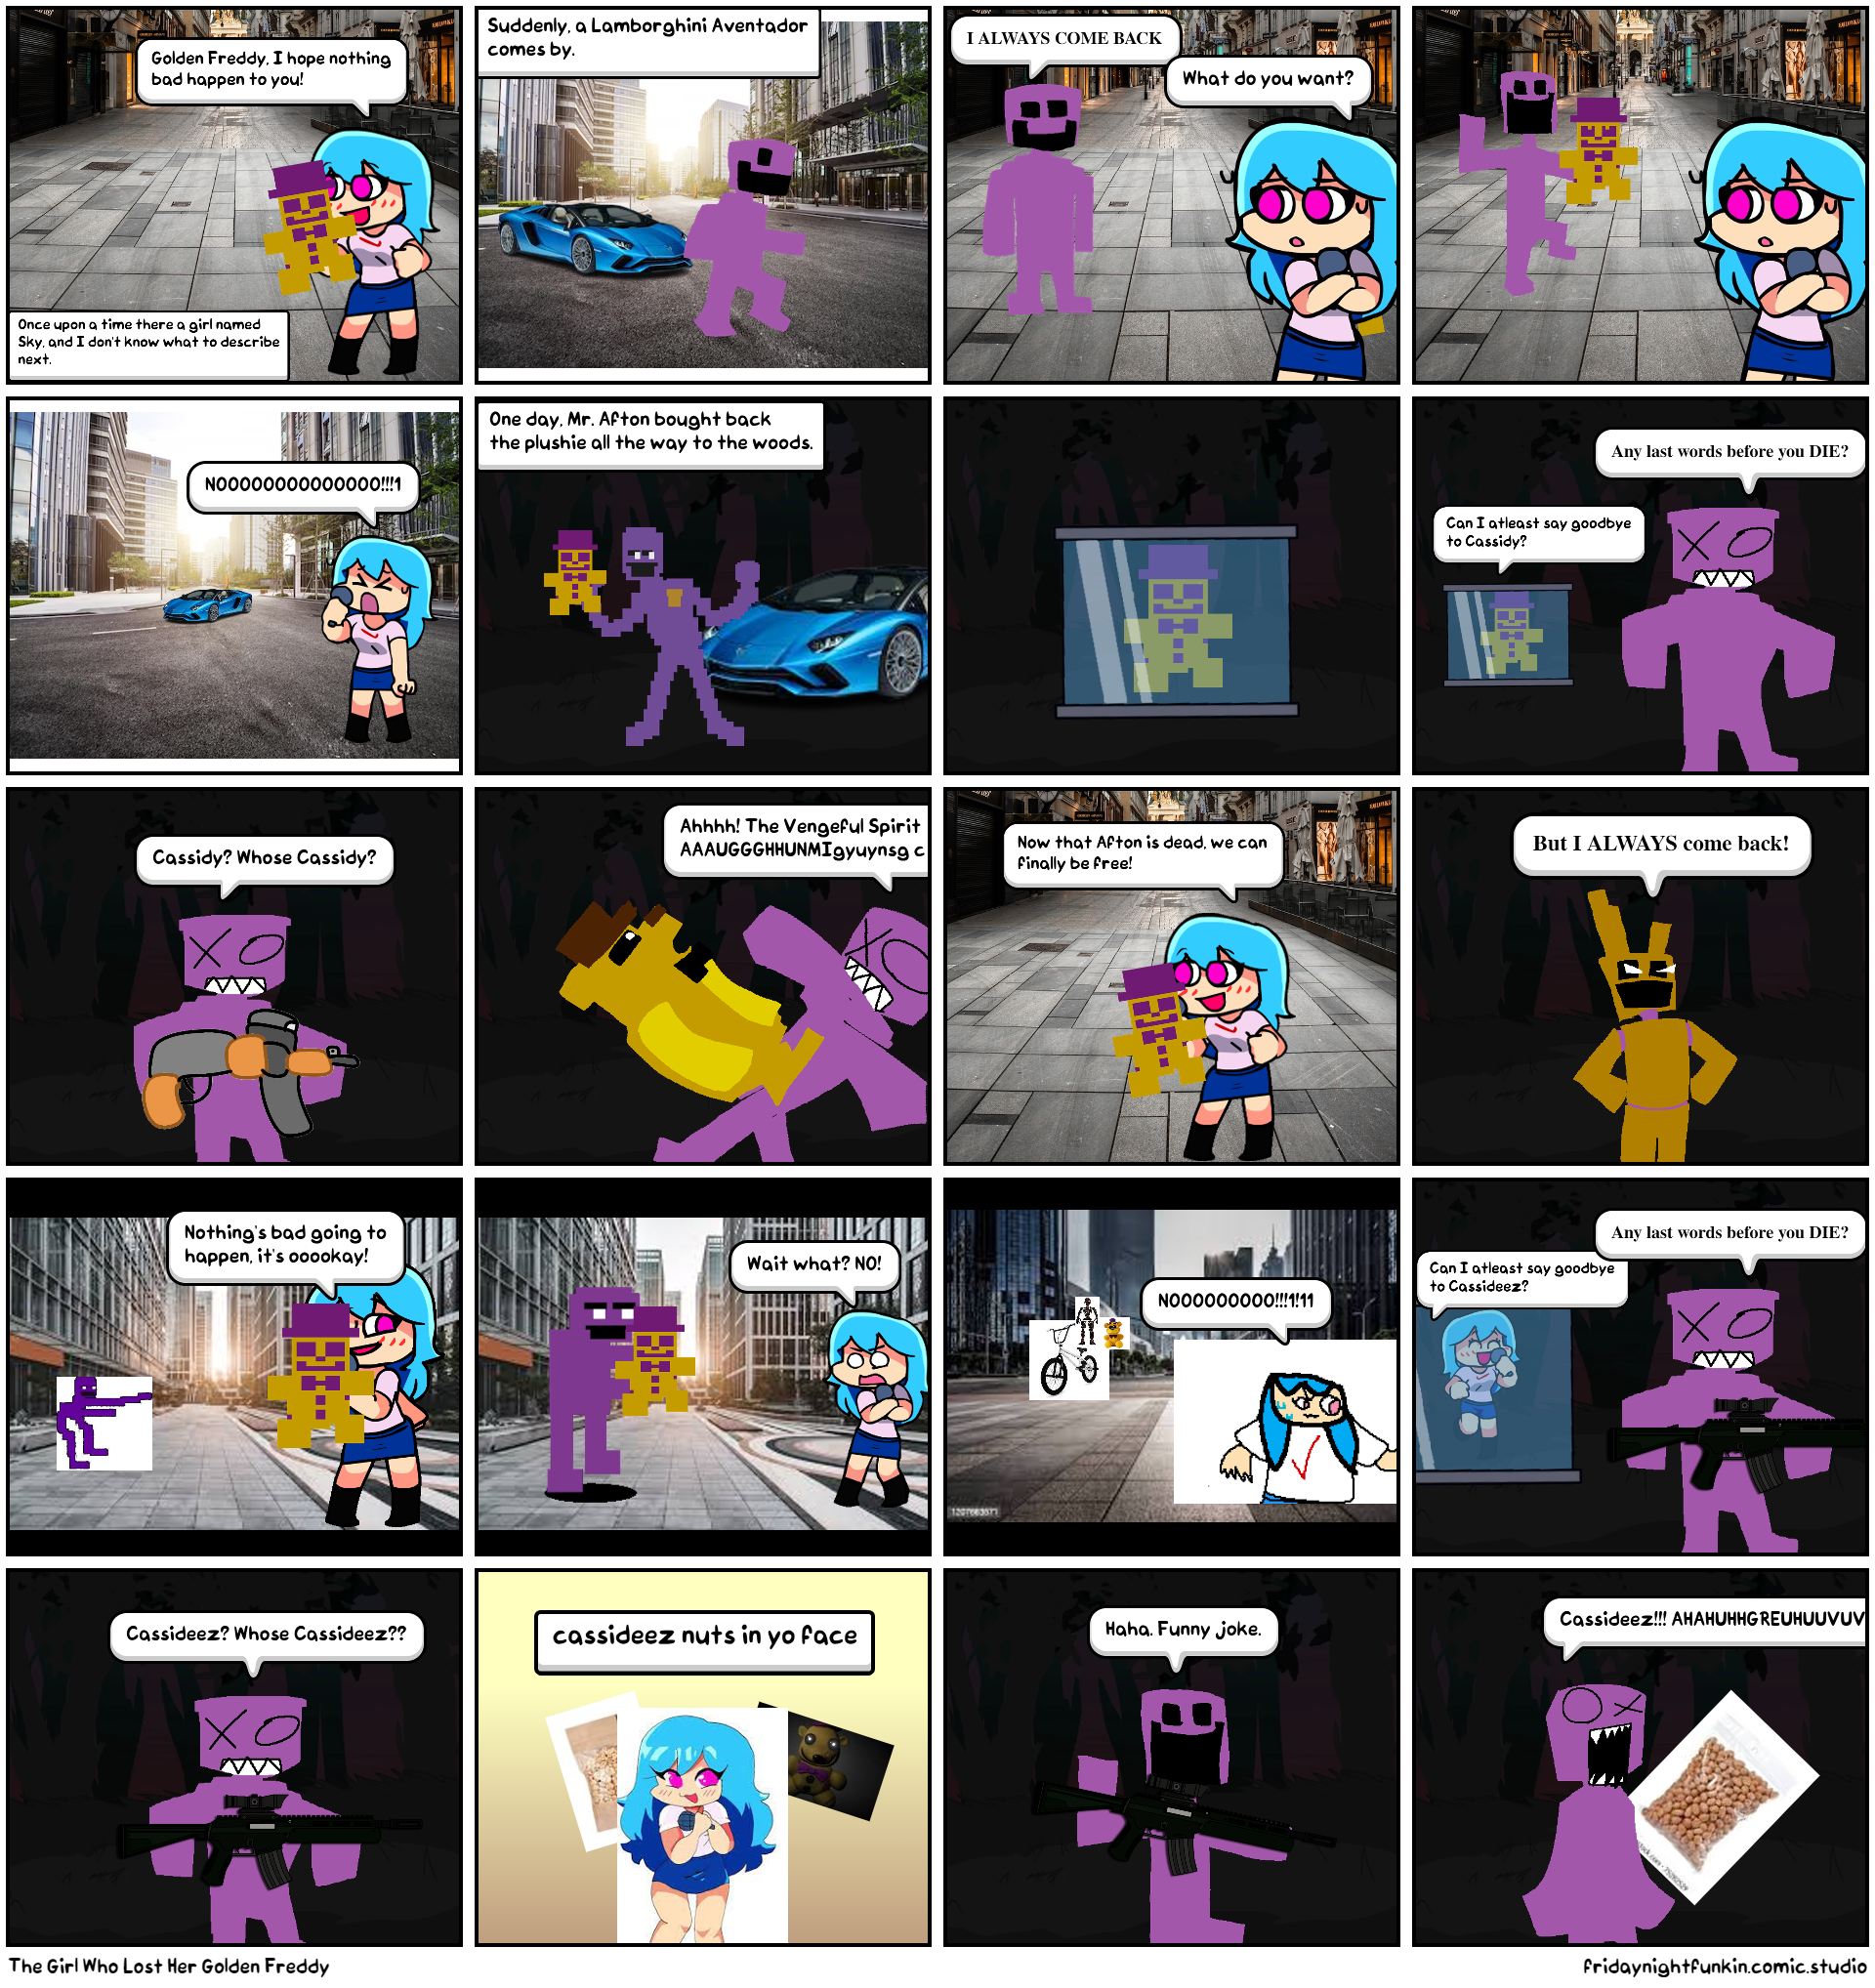 The Girl Who Lost Her Golden Freddy